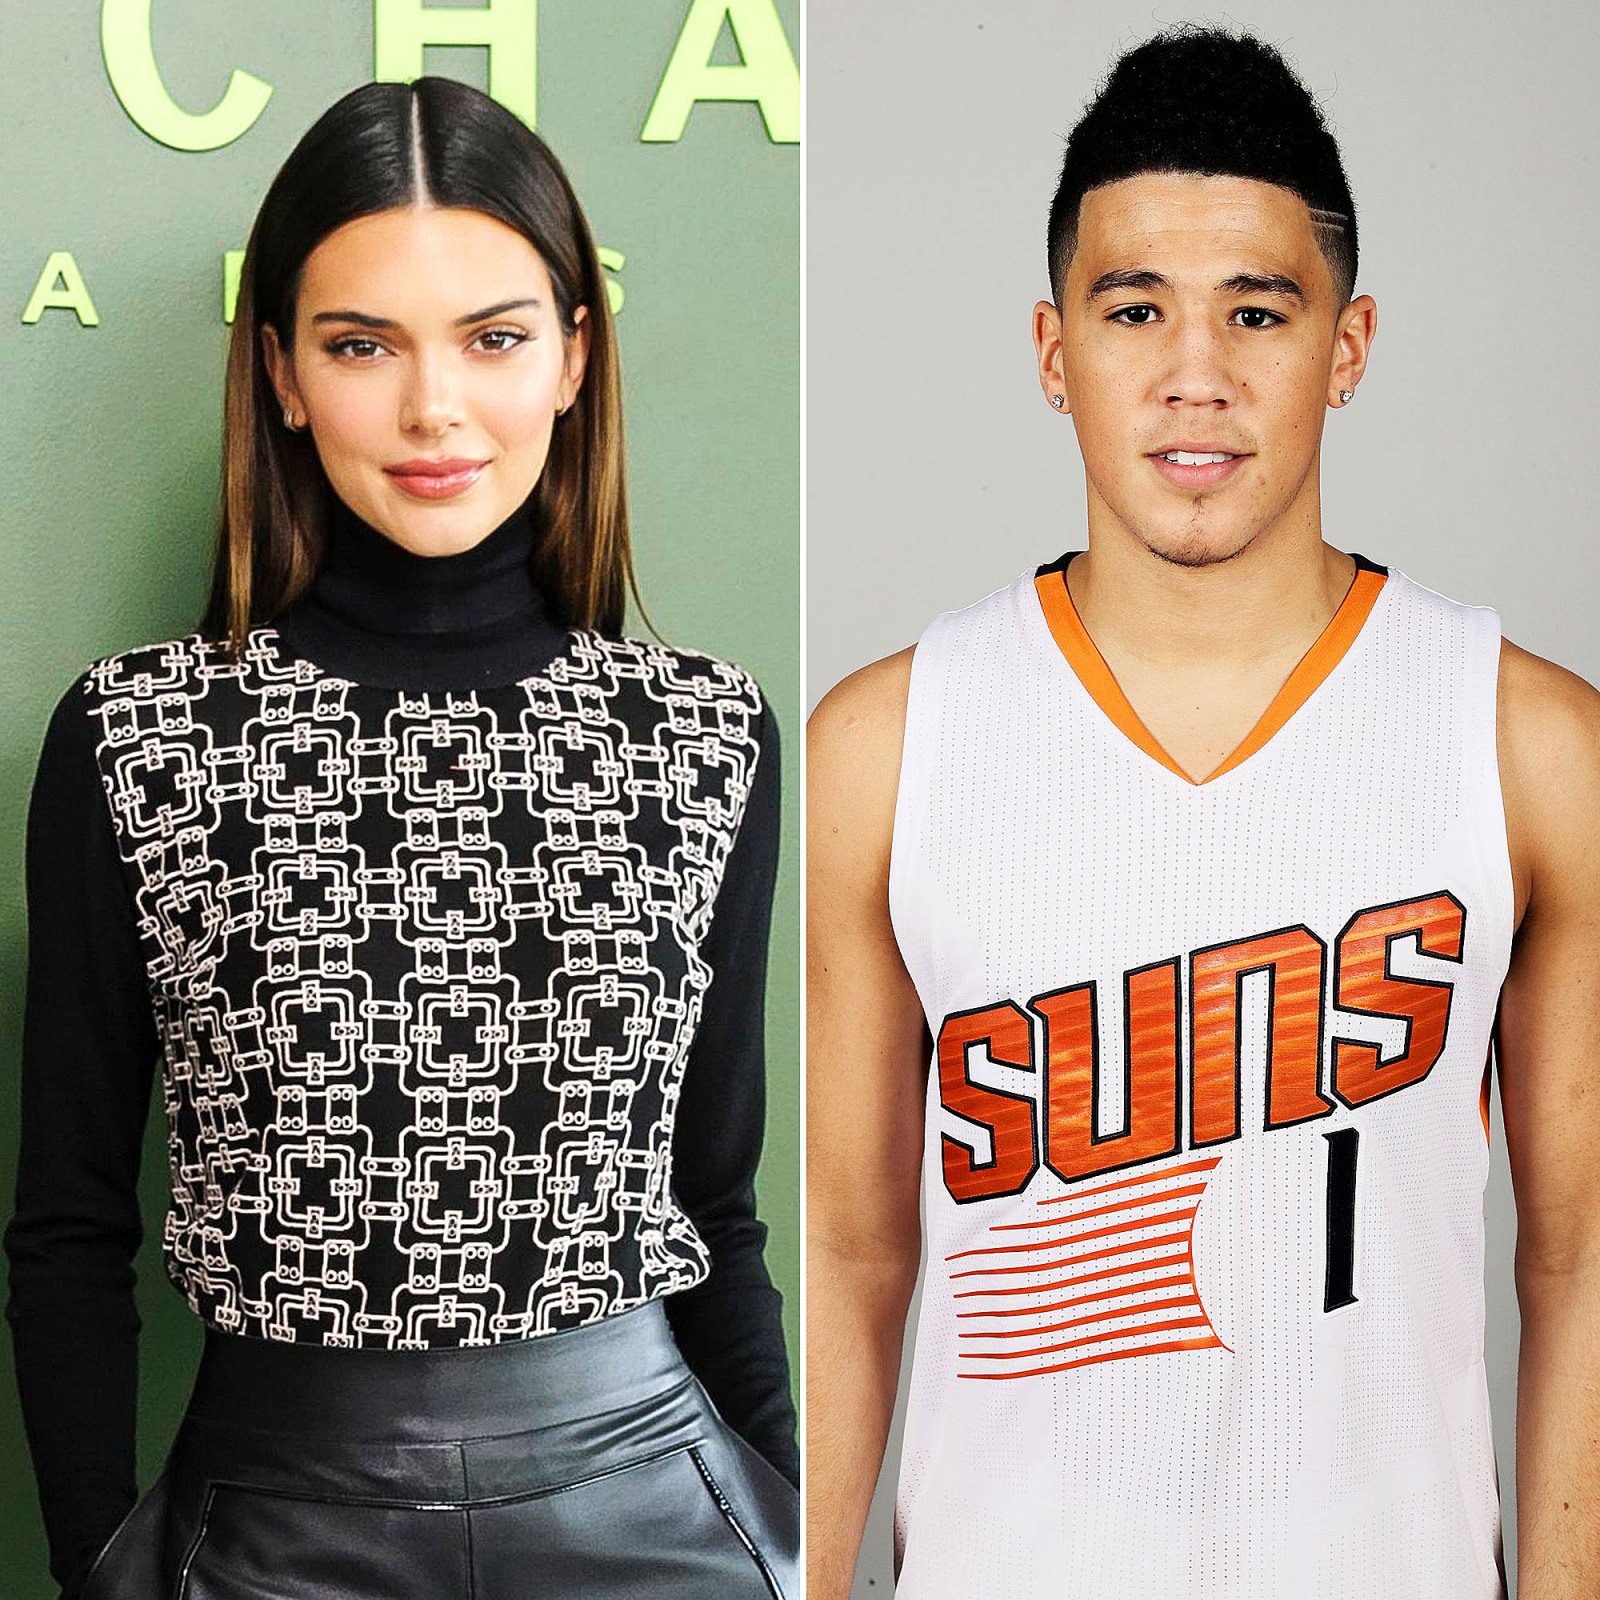 Kendall Jenner Devin Booker Care About Each Other Immensely